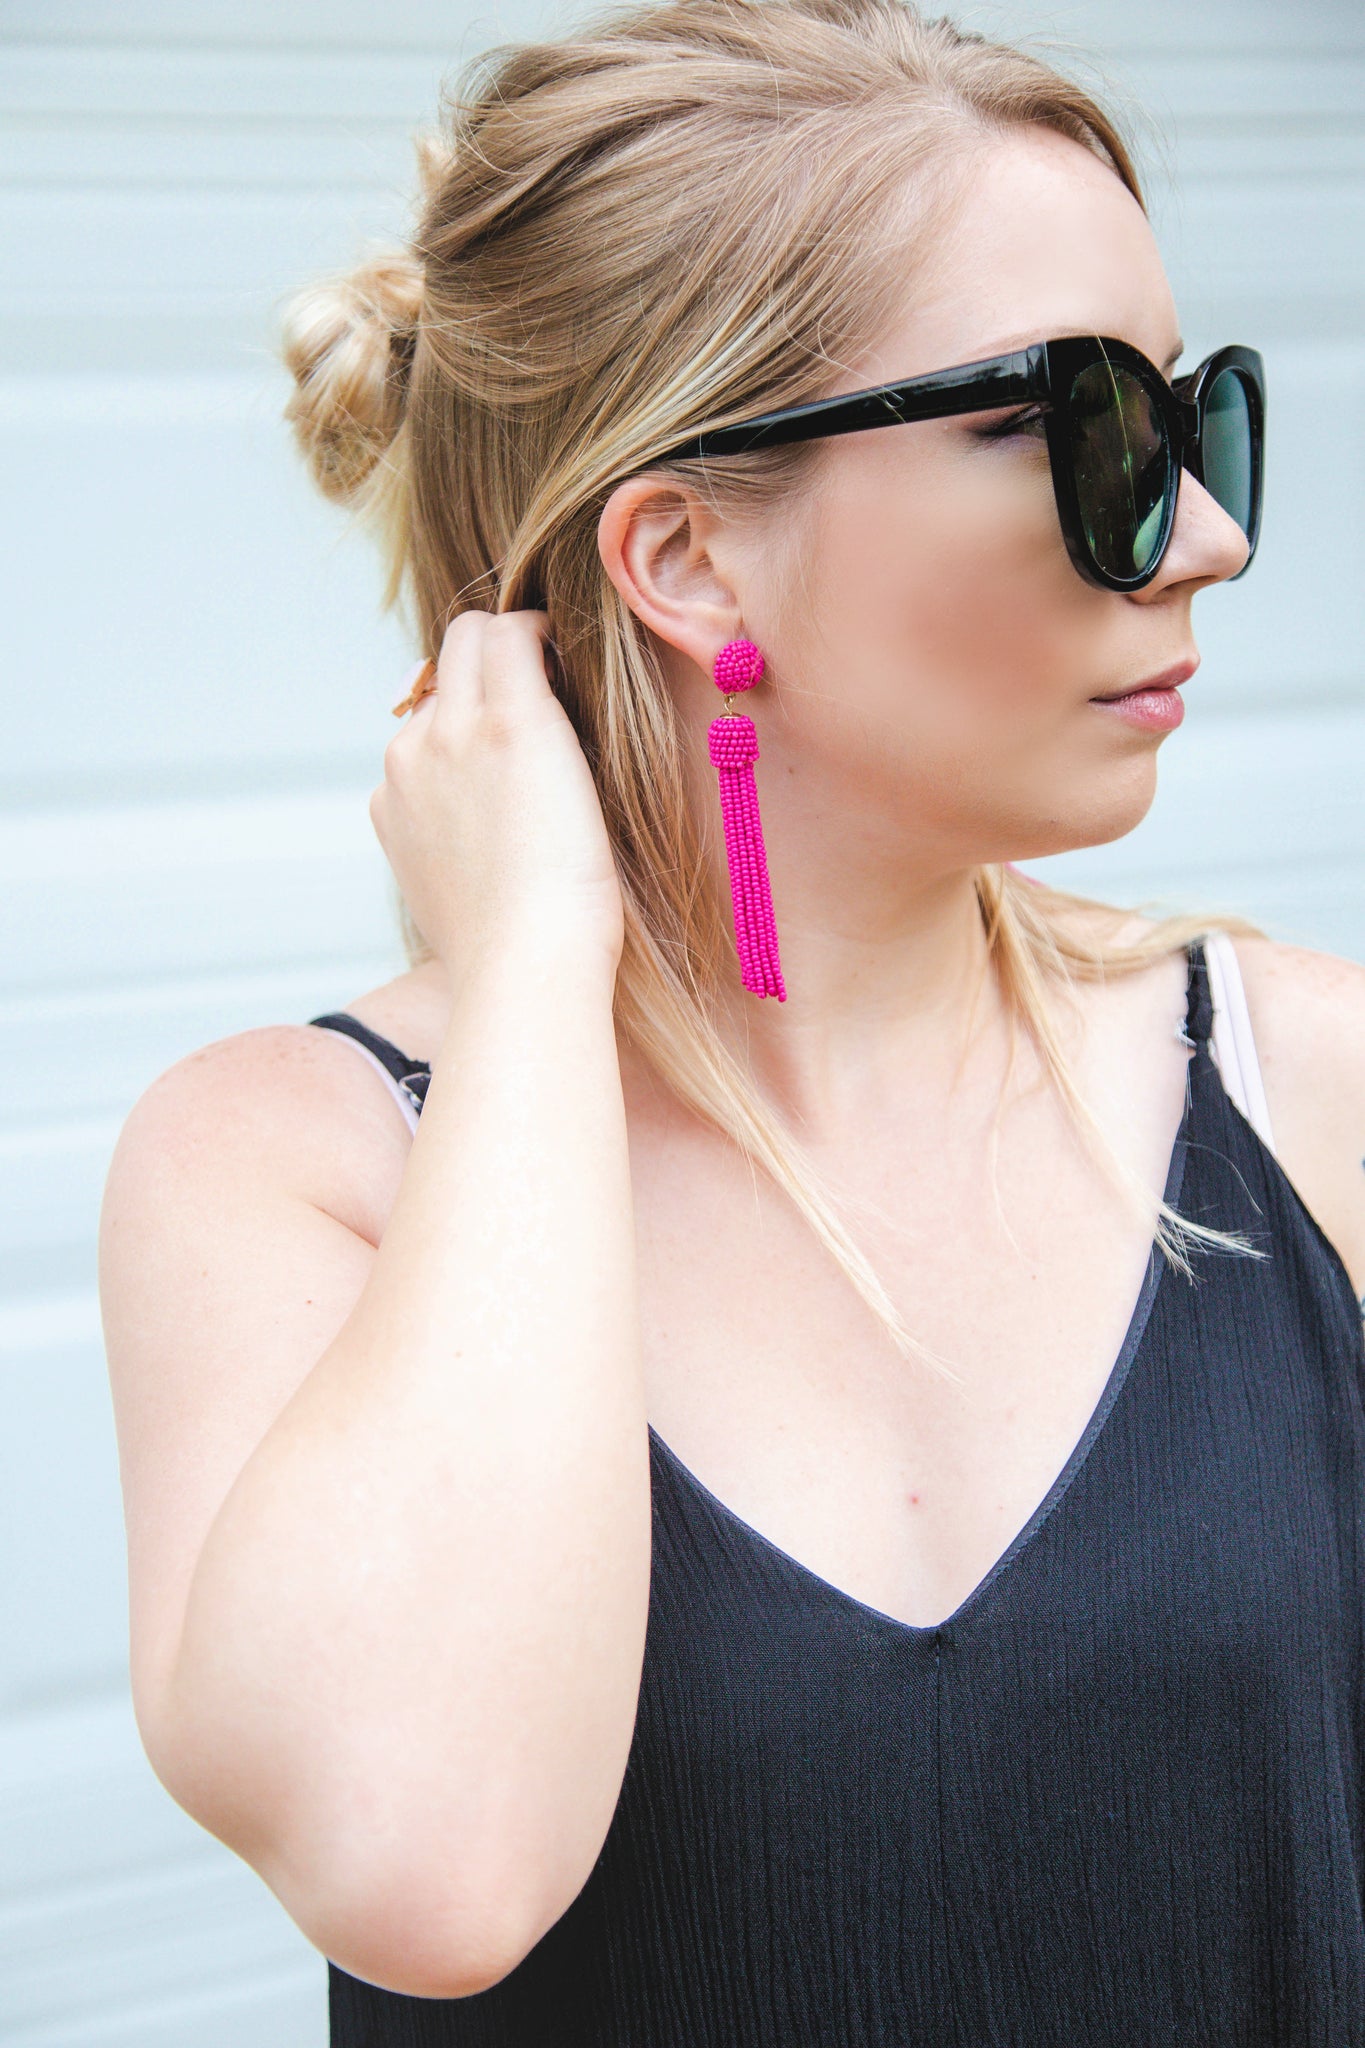 Chic and True Beaded Tassel Earring-Hot Pink